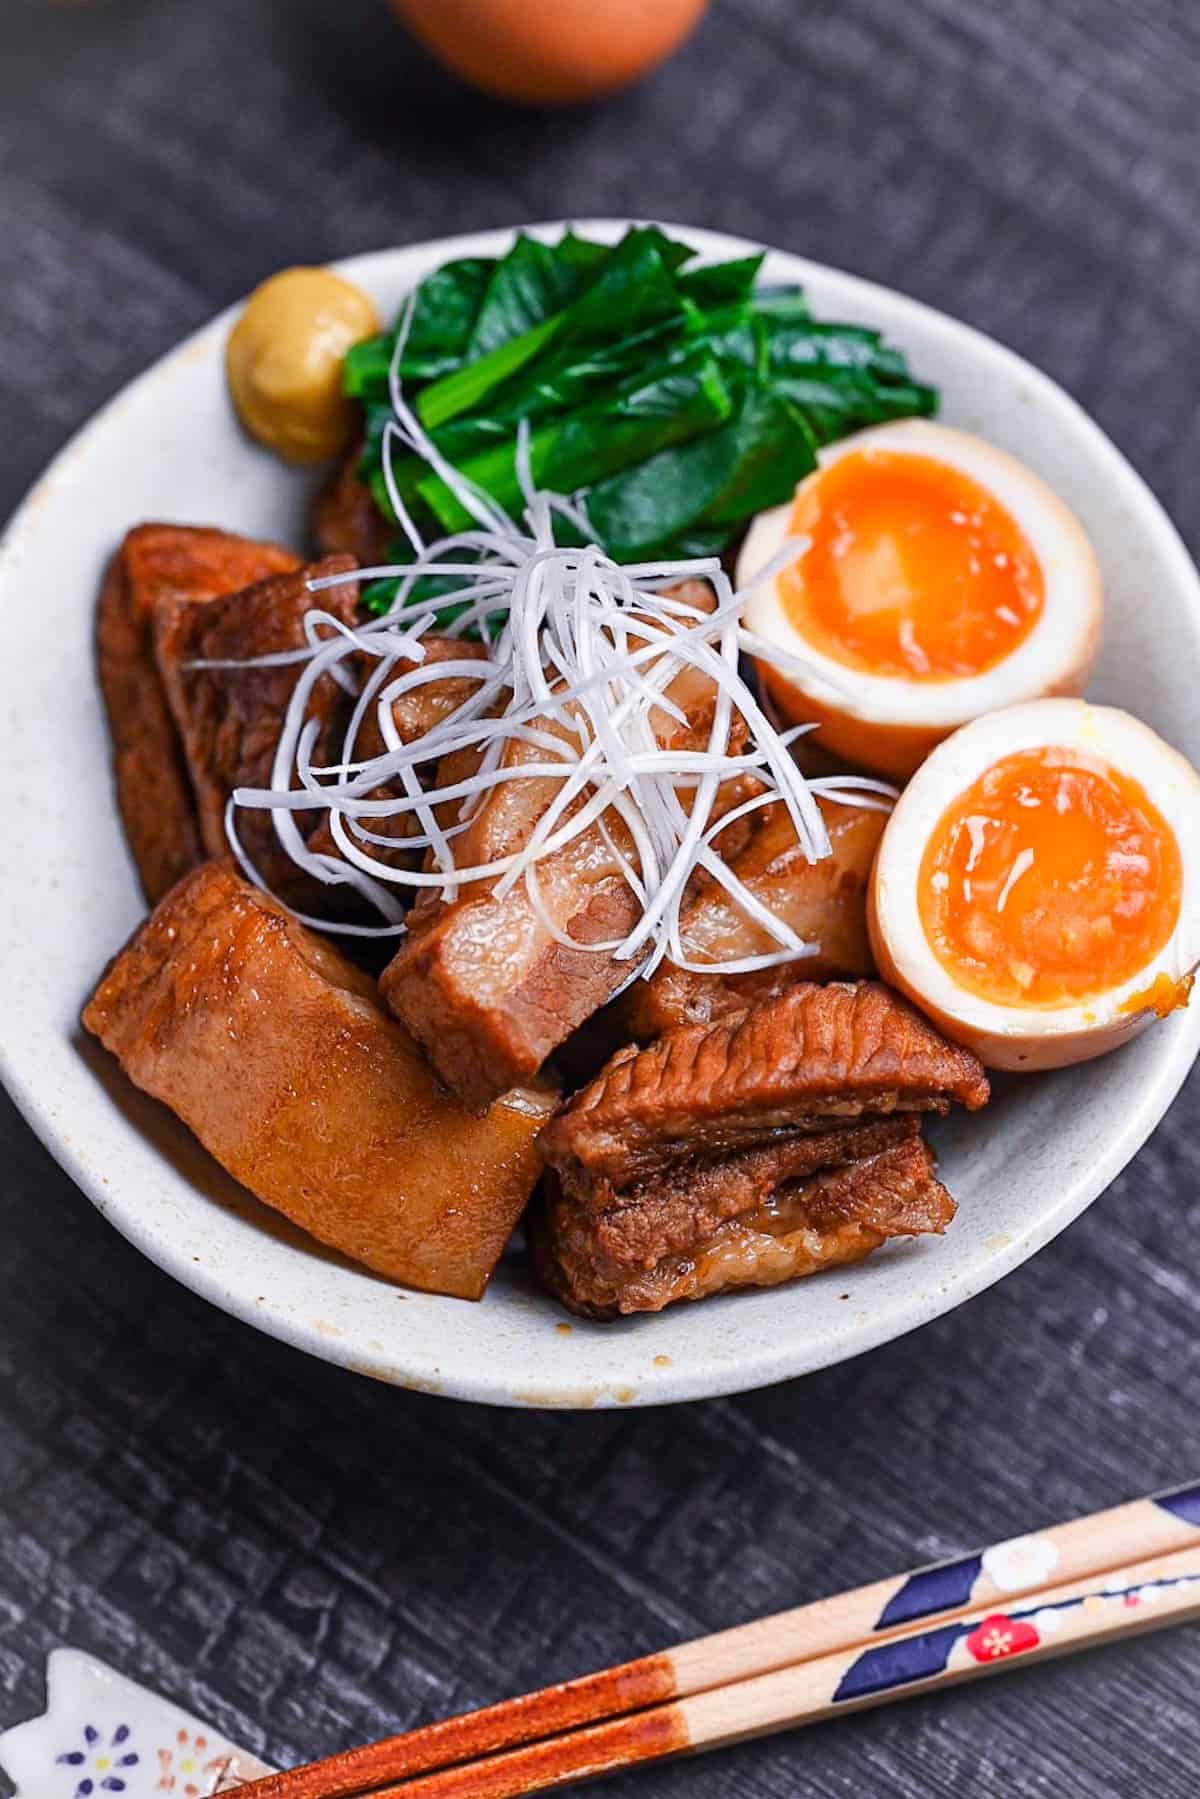 Buta no kakuni (Japanese braised pork belly) in an off-white dish with marinated soft boiled eggs, mustard spinach and a blob of mustard topped with shredded green onion